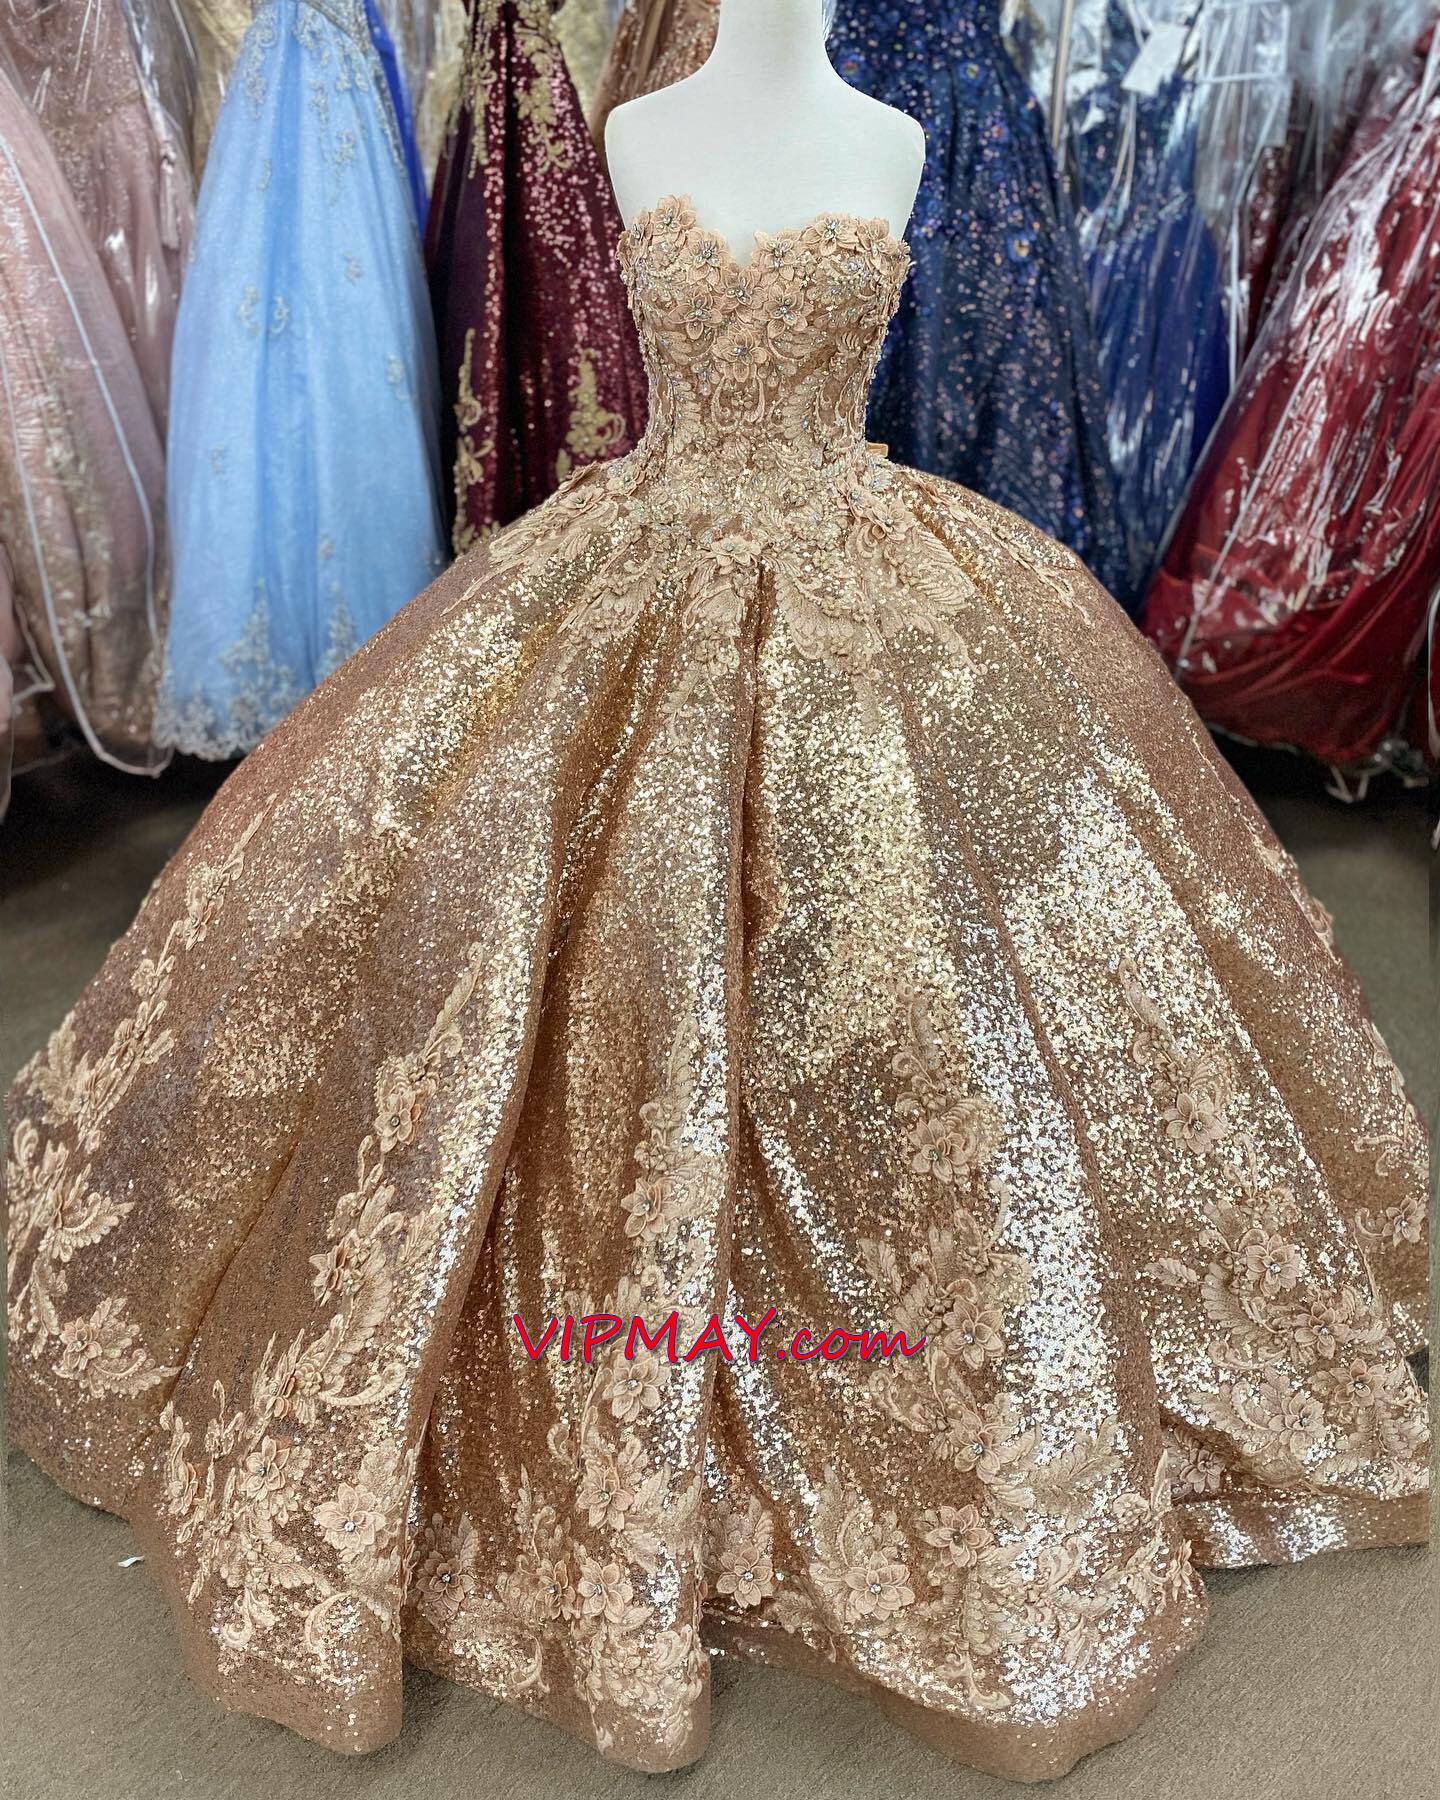 quinceanera dress lace puffy elegant,most elegant quinceanera dress,where can i find sparkly quinceanera dress,full sequin pageant dress for teenage girl,sequin ball gown charro quinceanera dress,sequined quinceanera dress,light gold quinceanera dress,gold quinceanera dress,quinceanera dress with applique,puffy skirt quinceanera dress,unique quinceanera dress puffy,